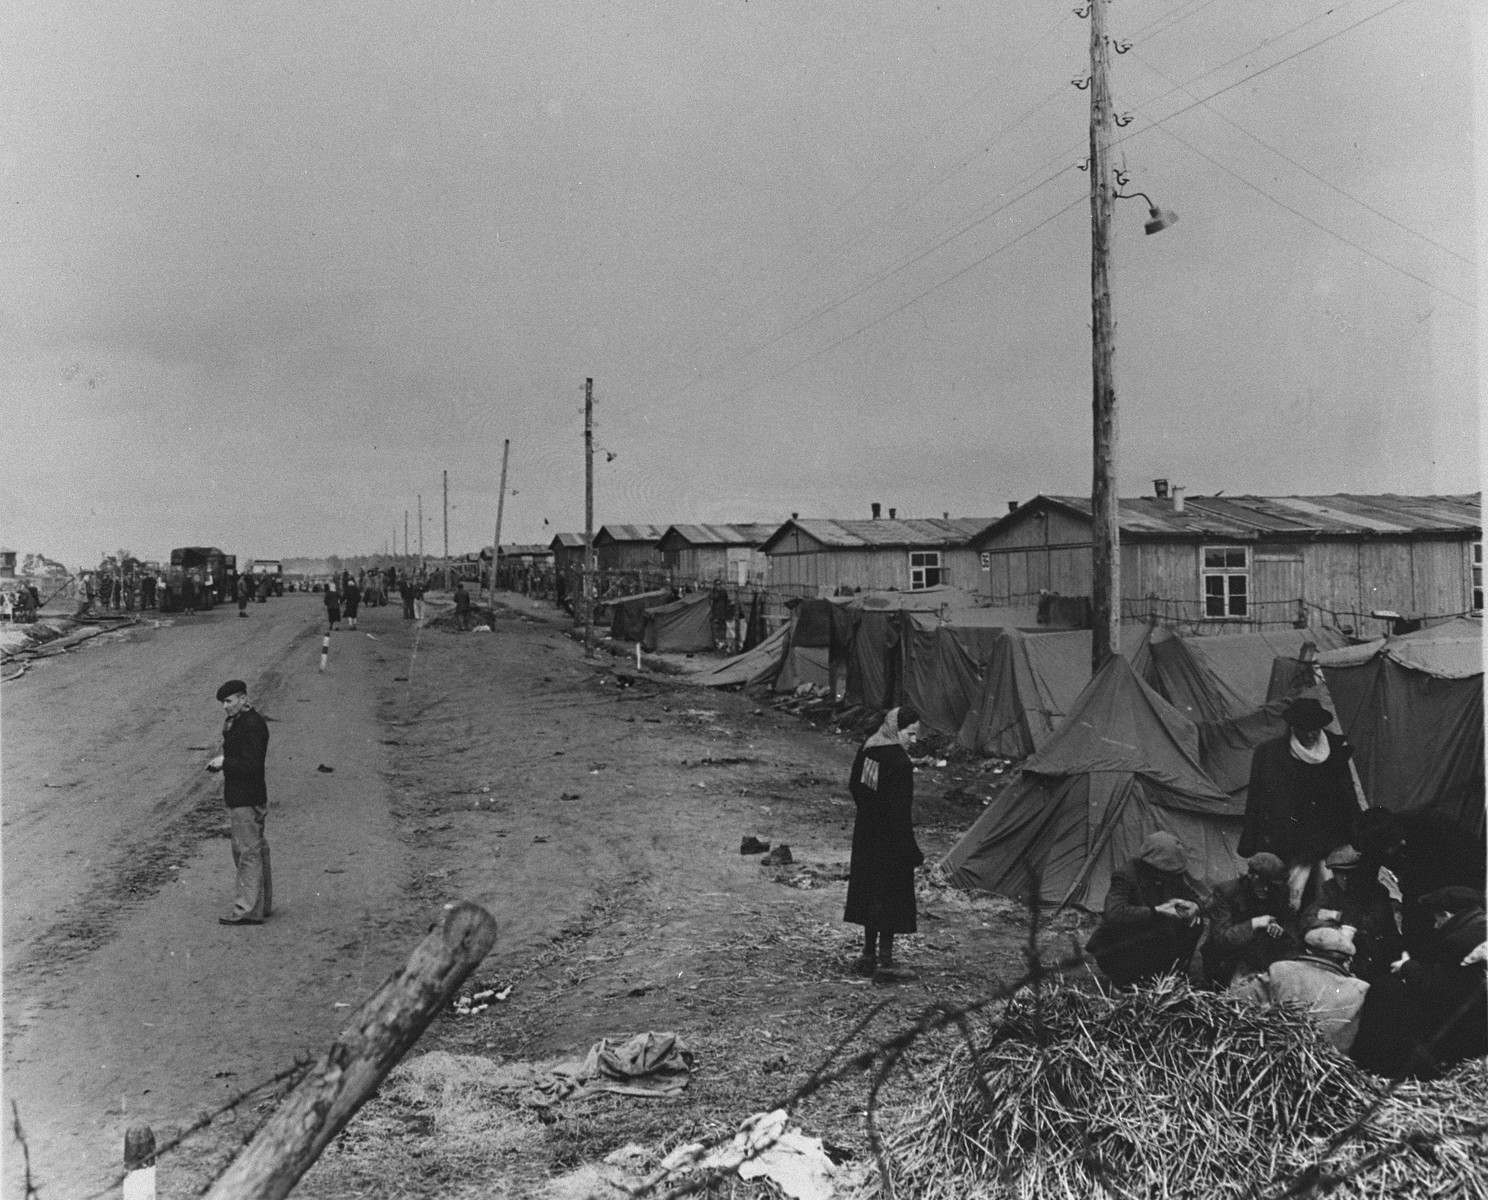 View of the main street in the Bergen-Belsen concentration camp (looking toward the entrance) lined with a row of small tents that have been pitched outside the barracks.  

In the foreground, a group of survivors huddles in front of one of the tents, while, in the distance, other liberated prisoners walk along the unpaved road. 

Original caption is illegible.